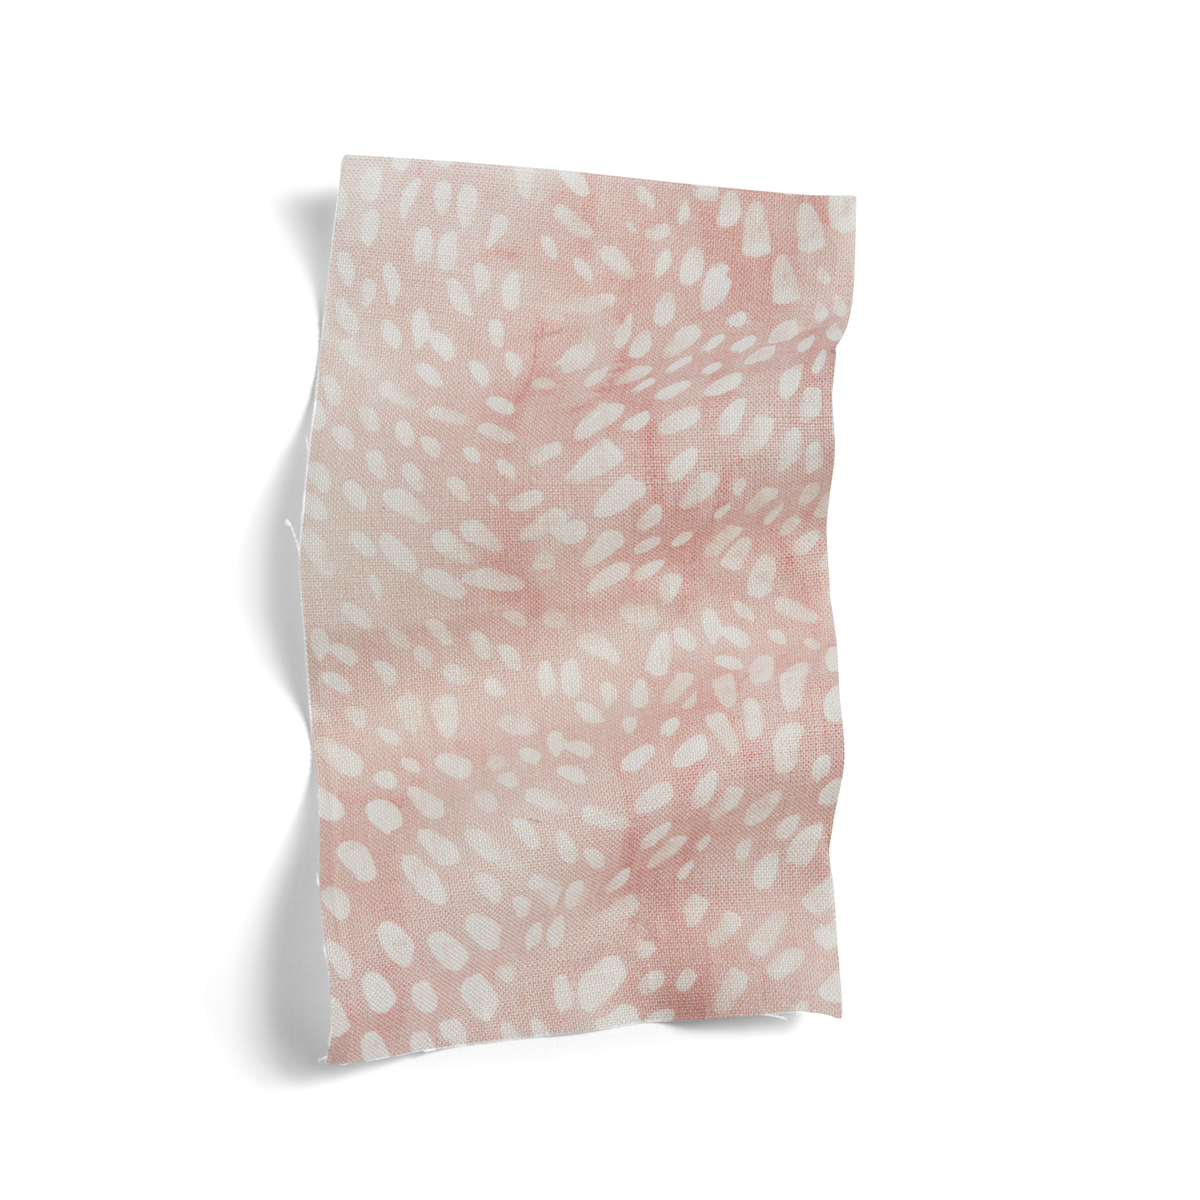 Speckled Fabric in Blush